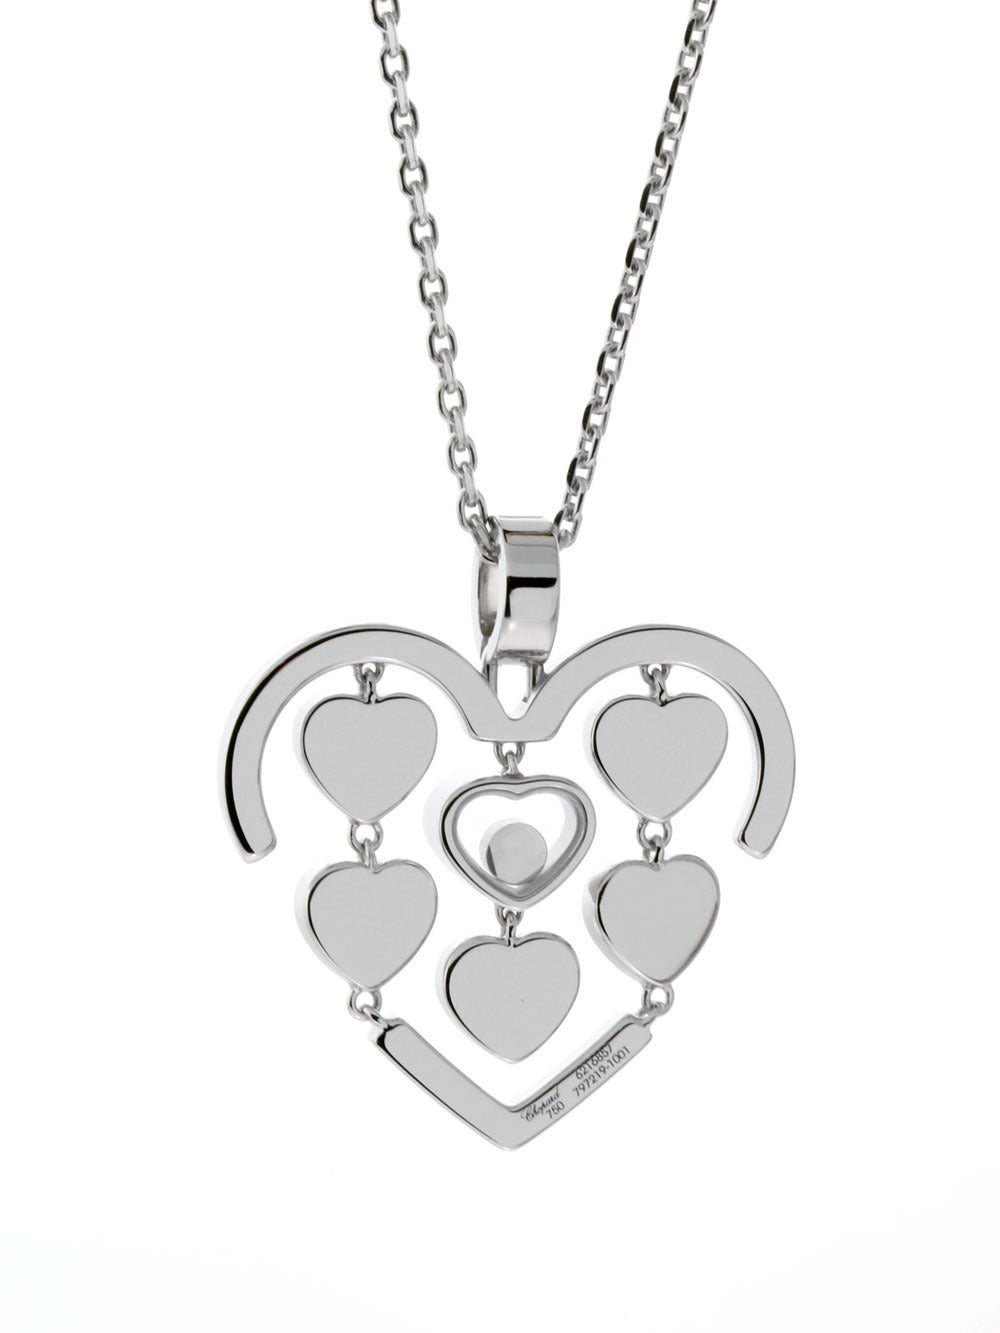 A fabulous Chopard necklace encapsulated with delicate hearts set with 45 of finest Chopard round brilliant cut diamonds (.27ct) set in 18k white gold.

Necklace Length: 16″
Pendant Dimensions: 1